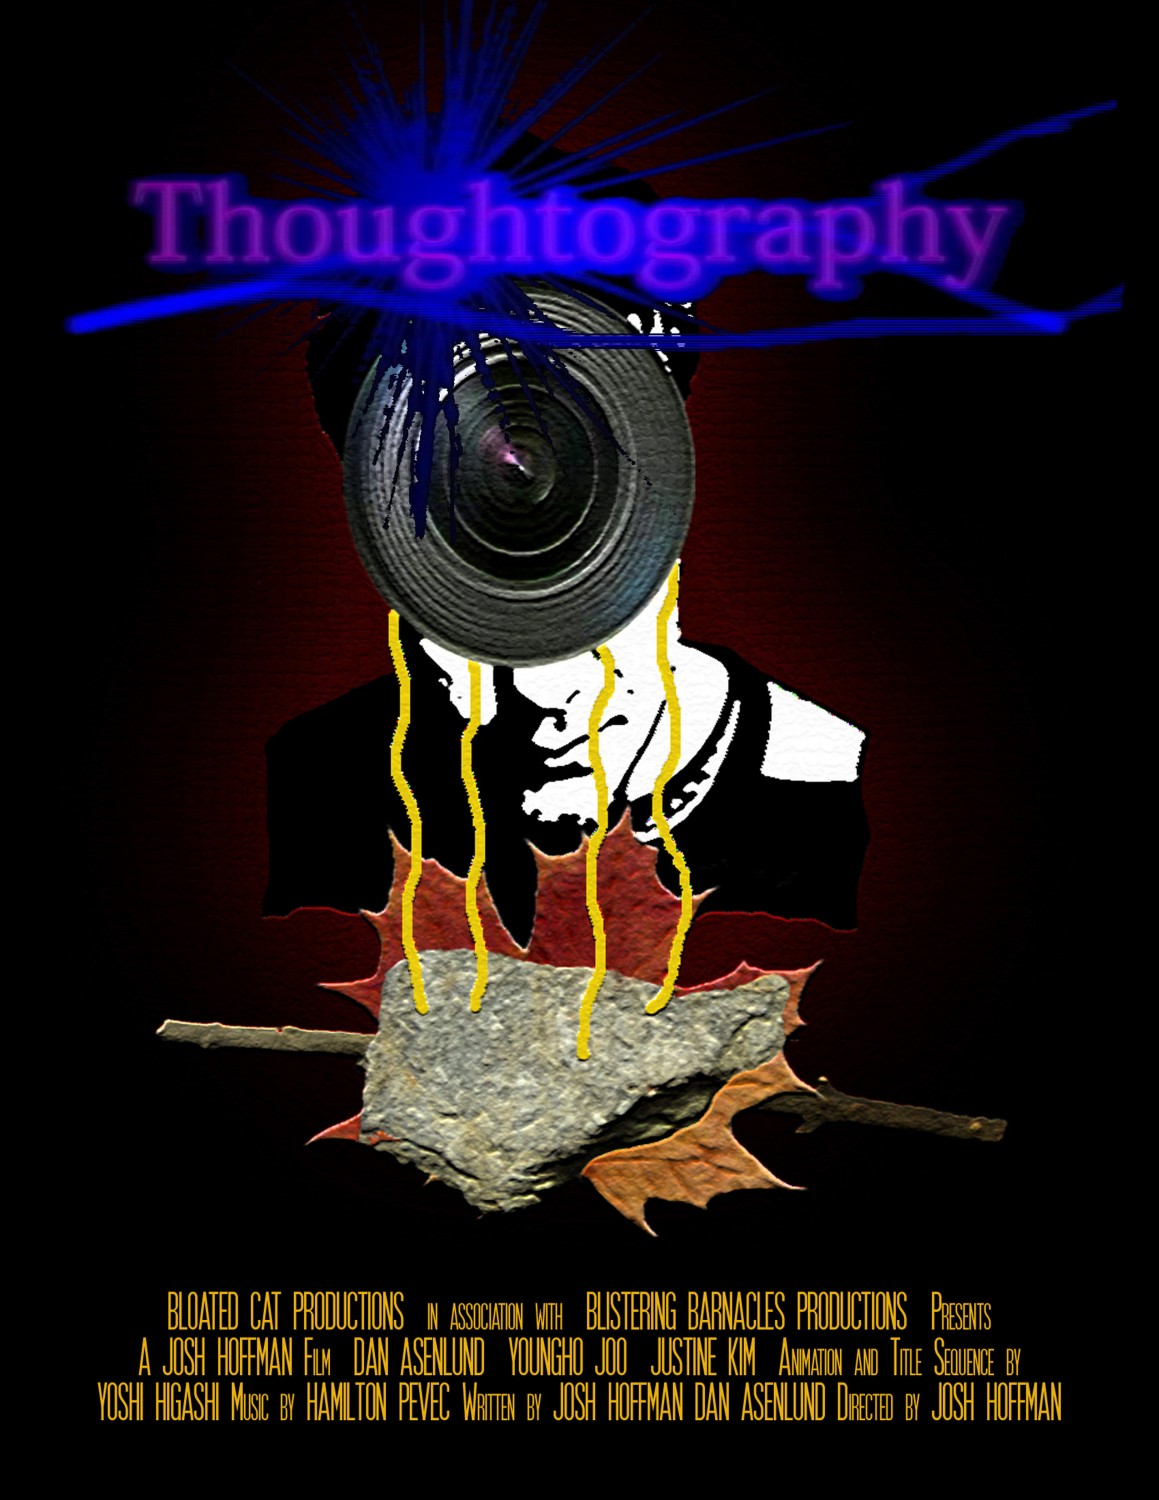 Extra Large Movie Poster Image for Thoughtography